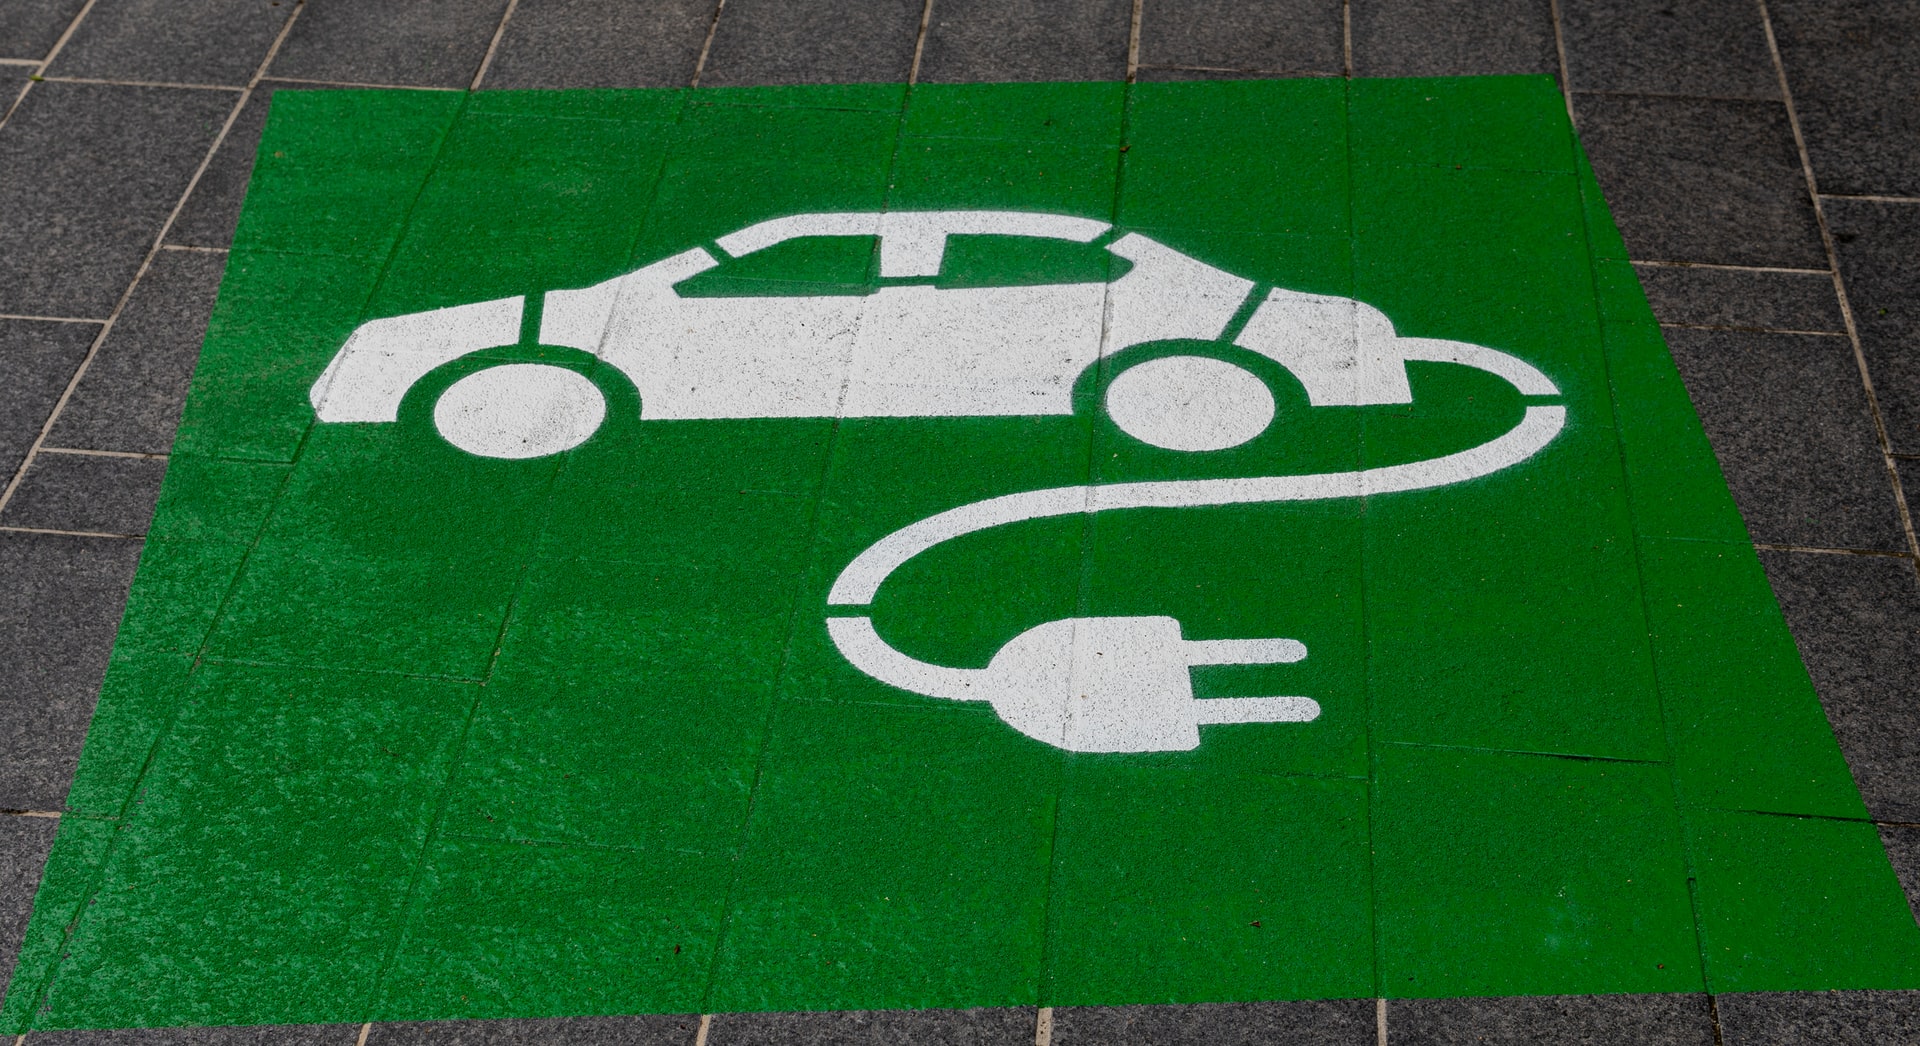 Hybrid or EVs: Which Should You Switch To?